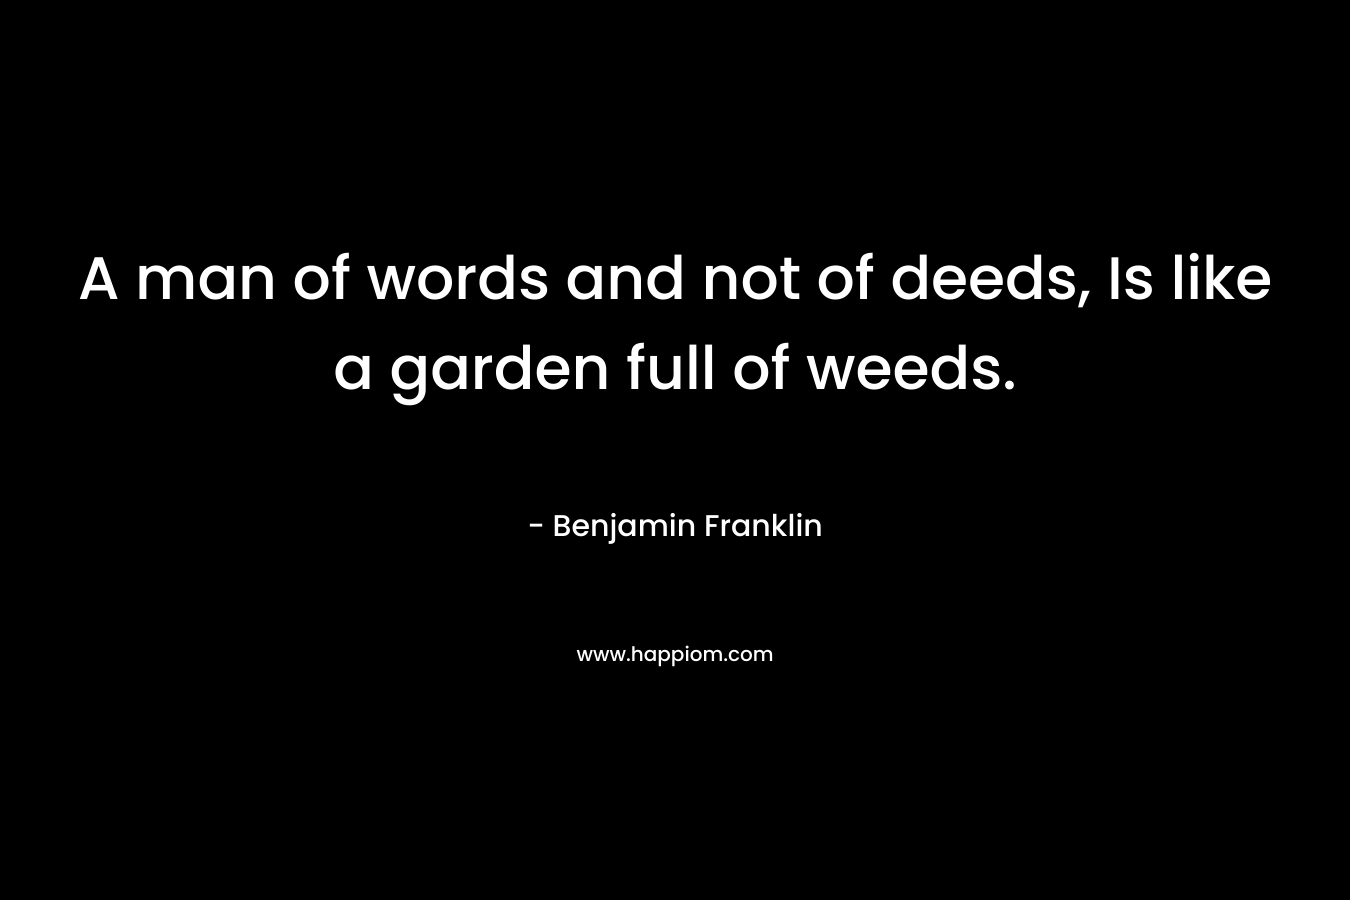 A man of words and not of deeds, Is like a garden full of weeds.